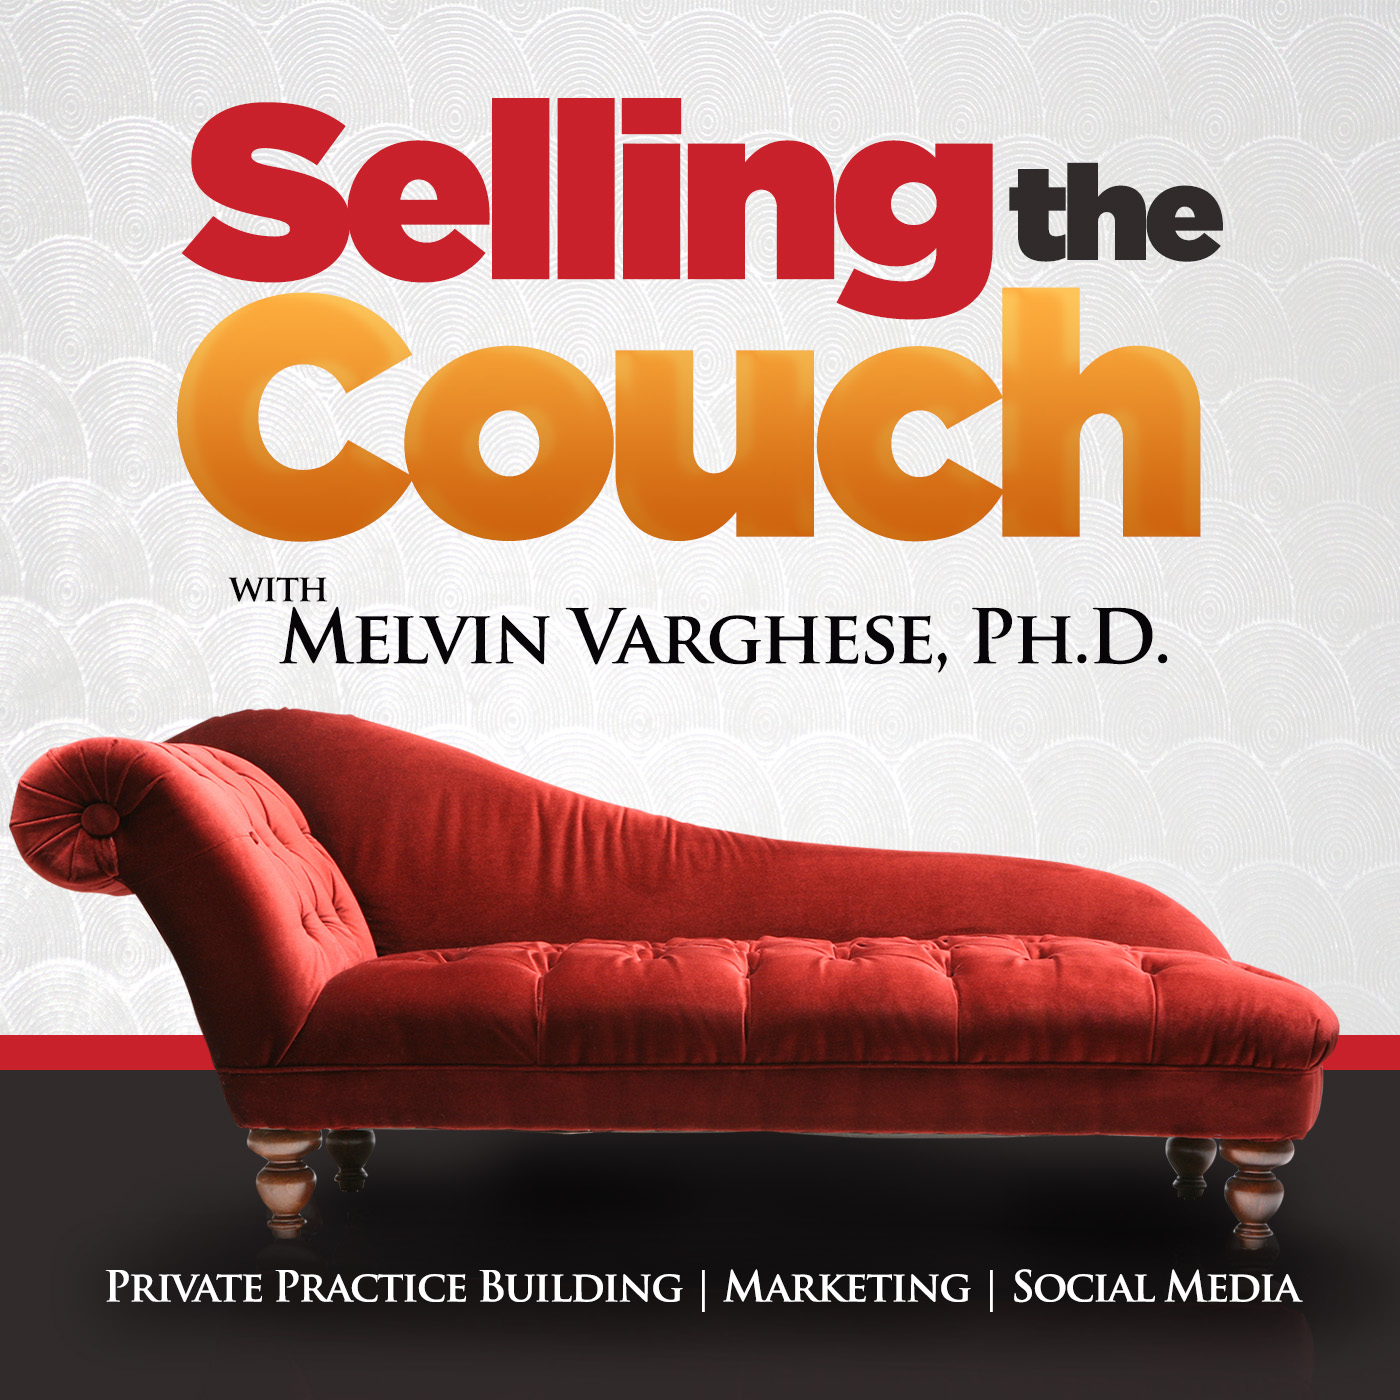 Selling The Couch with Melvin Varghese